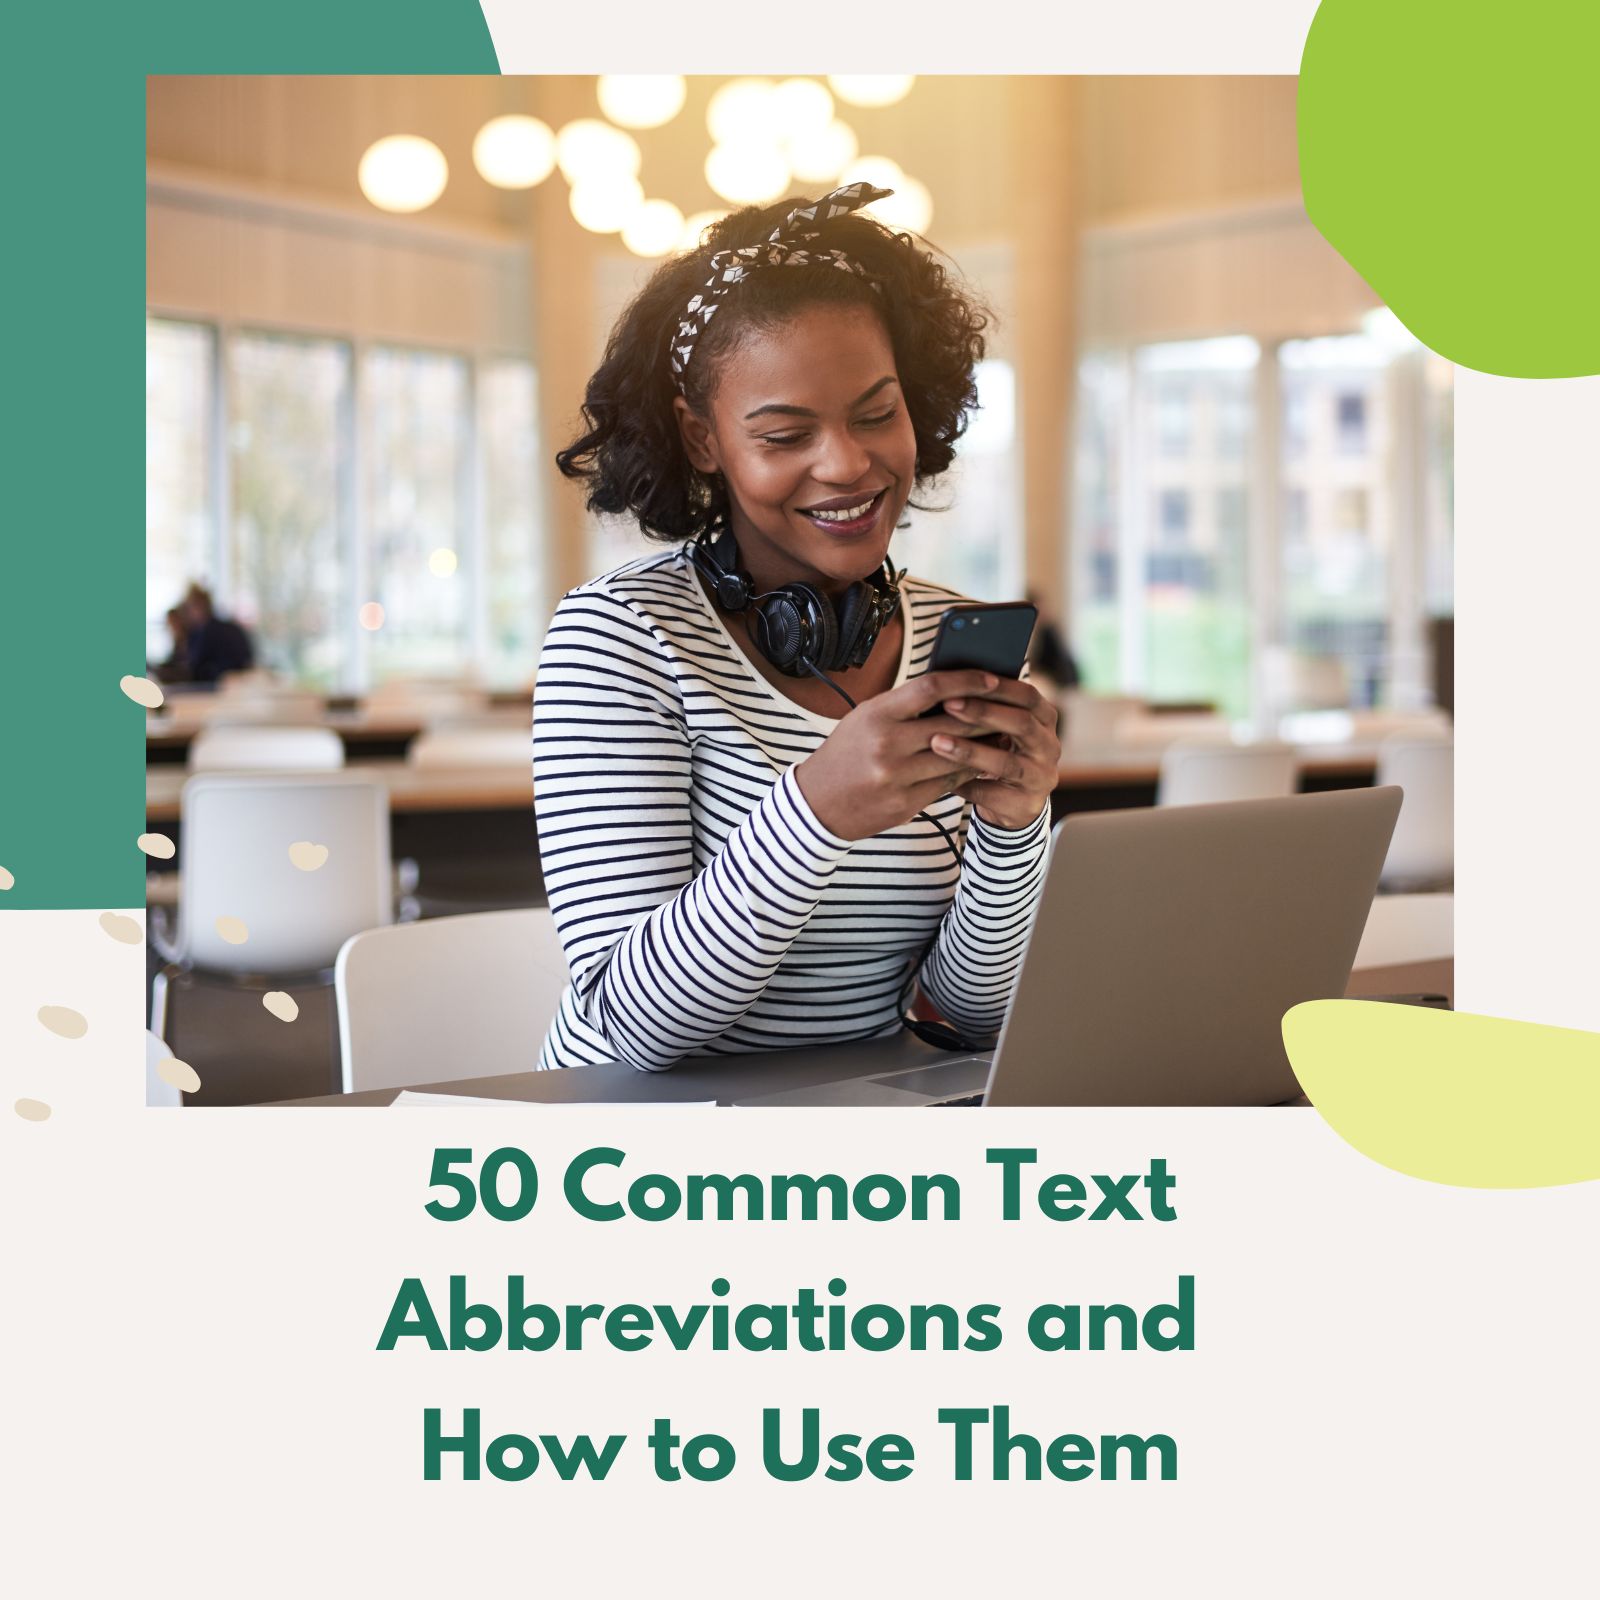 29 Texting Abbreviations and How to Use Them